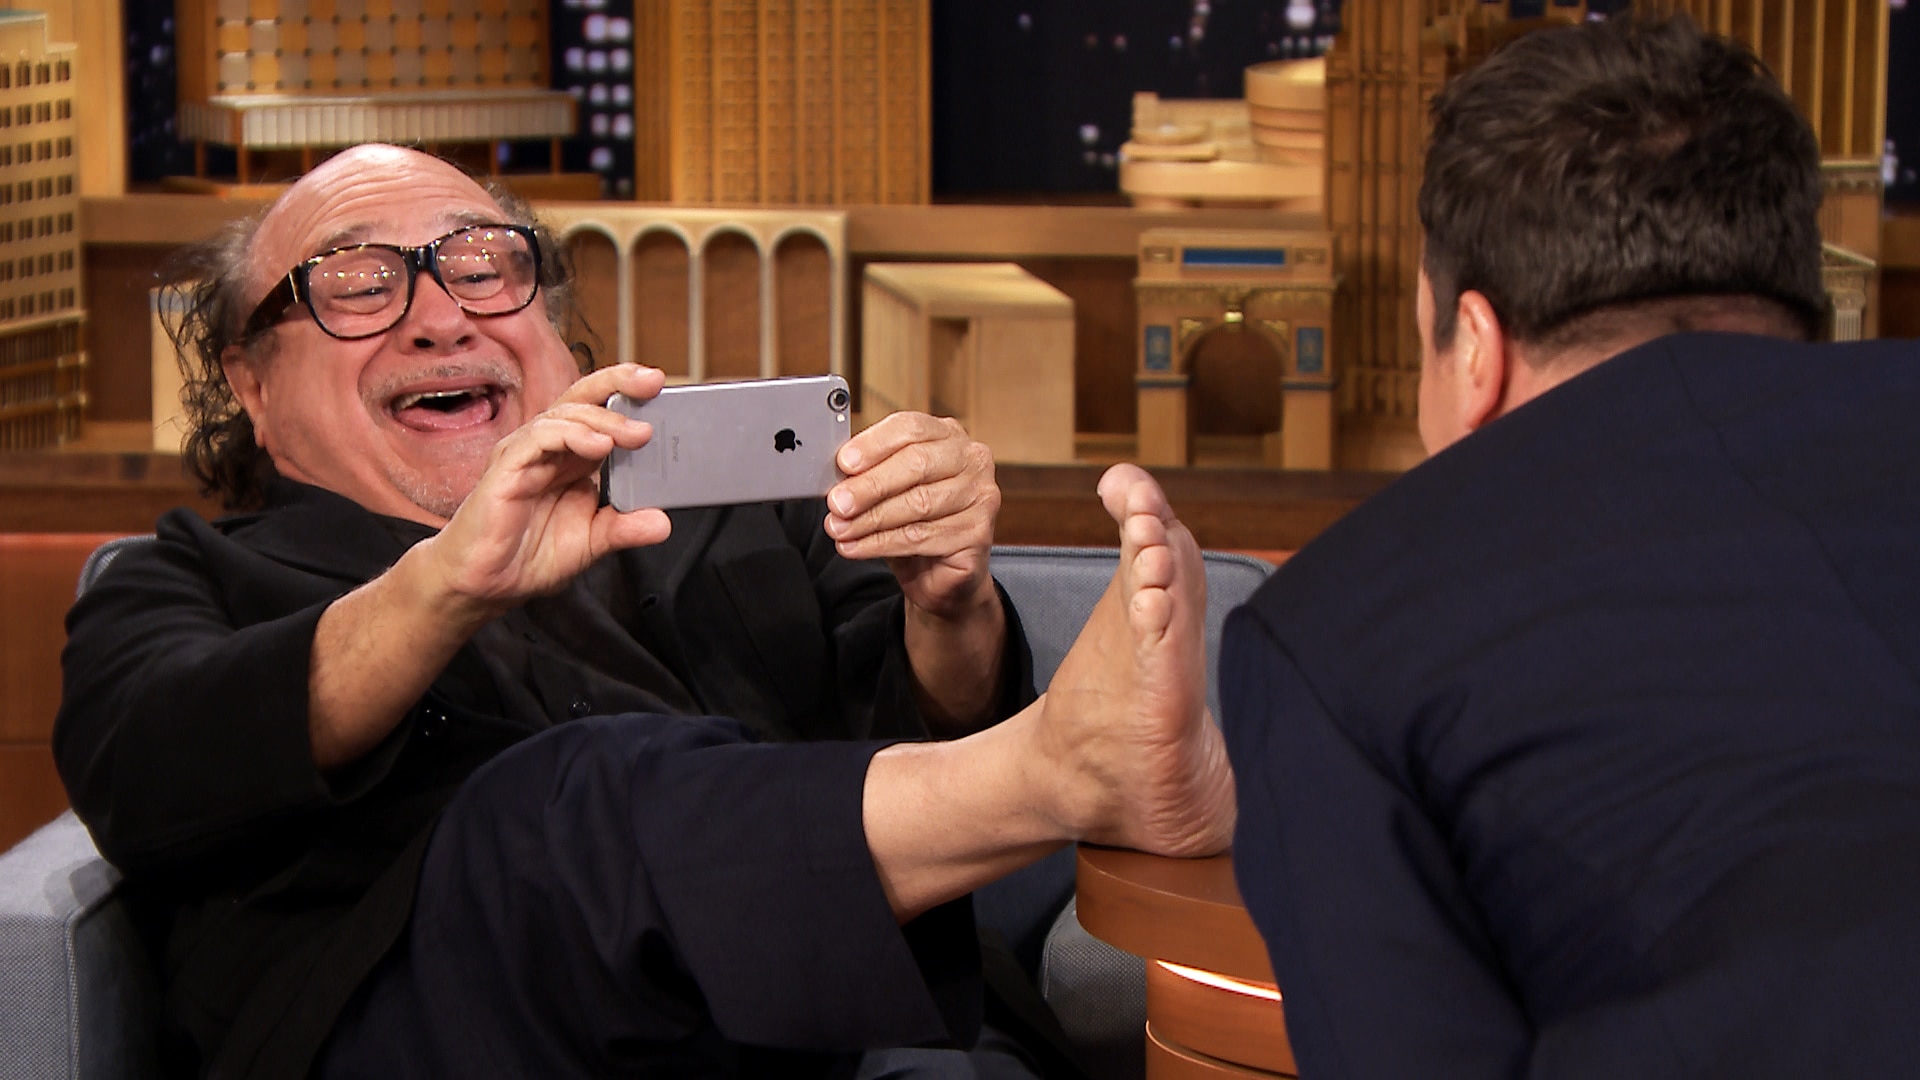 Danny DeVito Brings #TrollFoot to The Tonight Show.